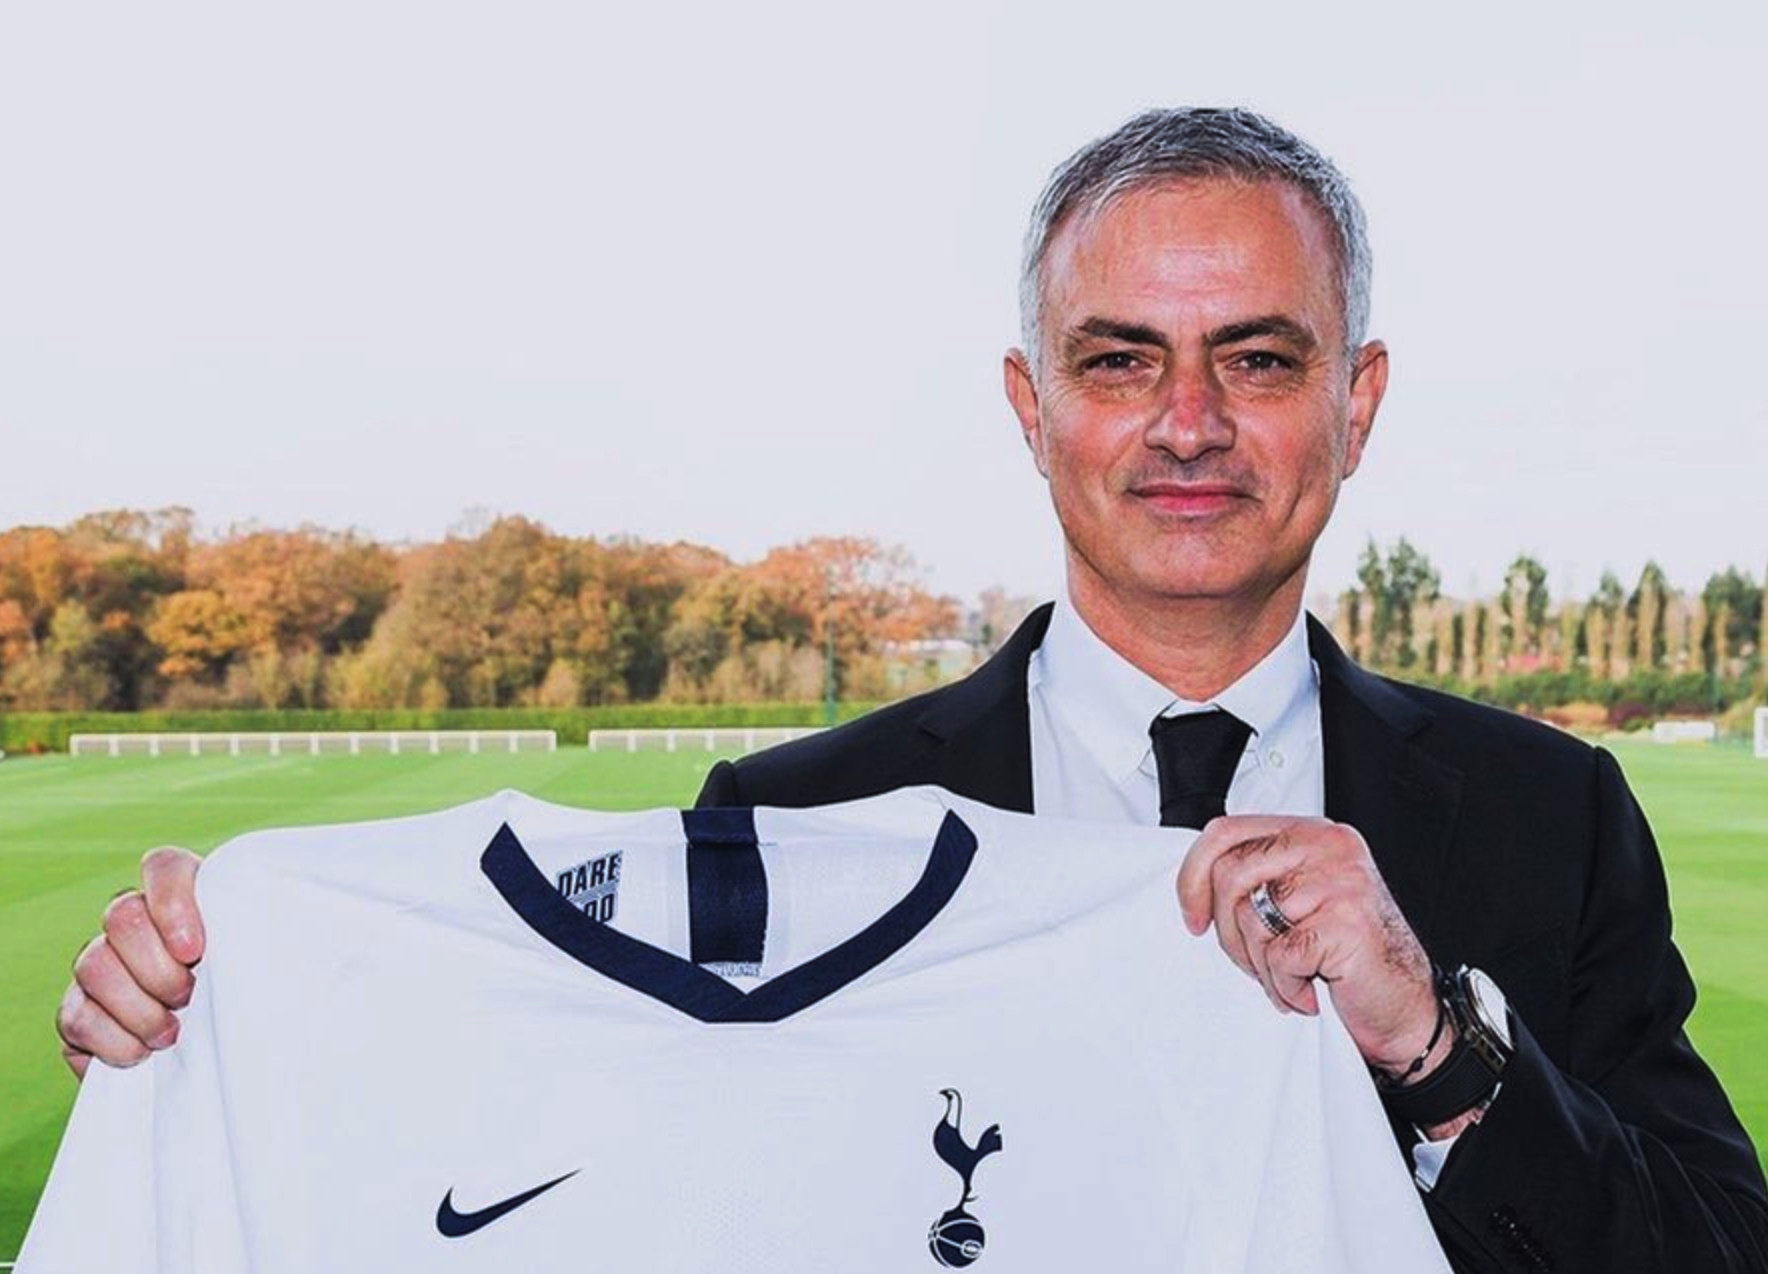 Tottenham gained a whopping 21 percent increase in their YouTube followership after appointing Jose Mourinho as manager